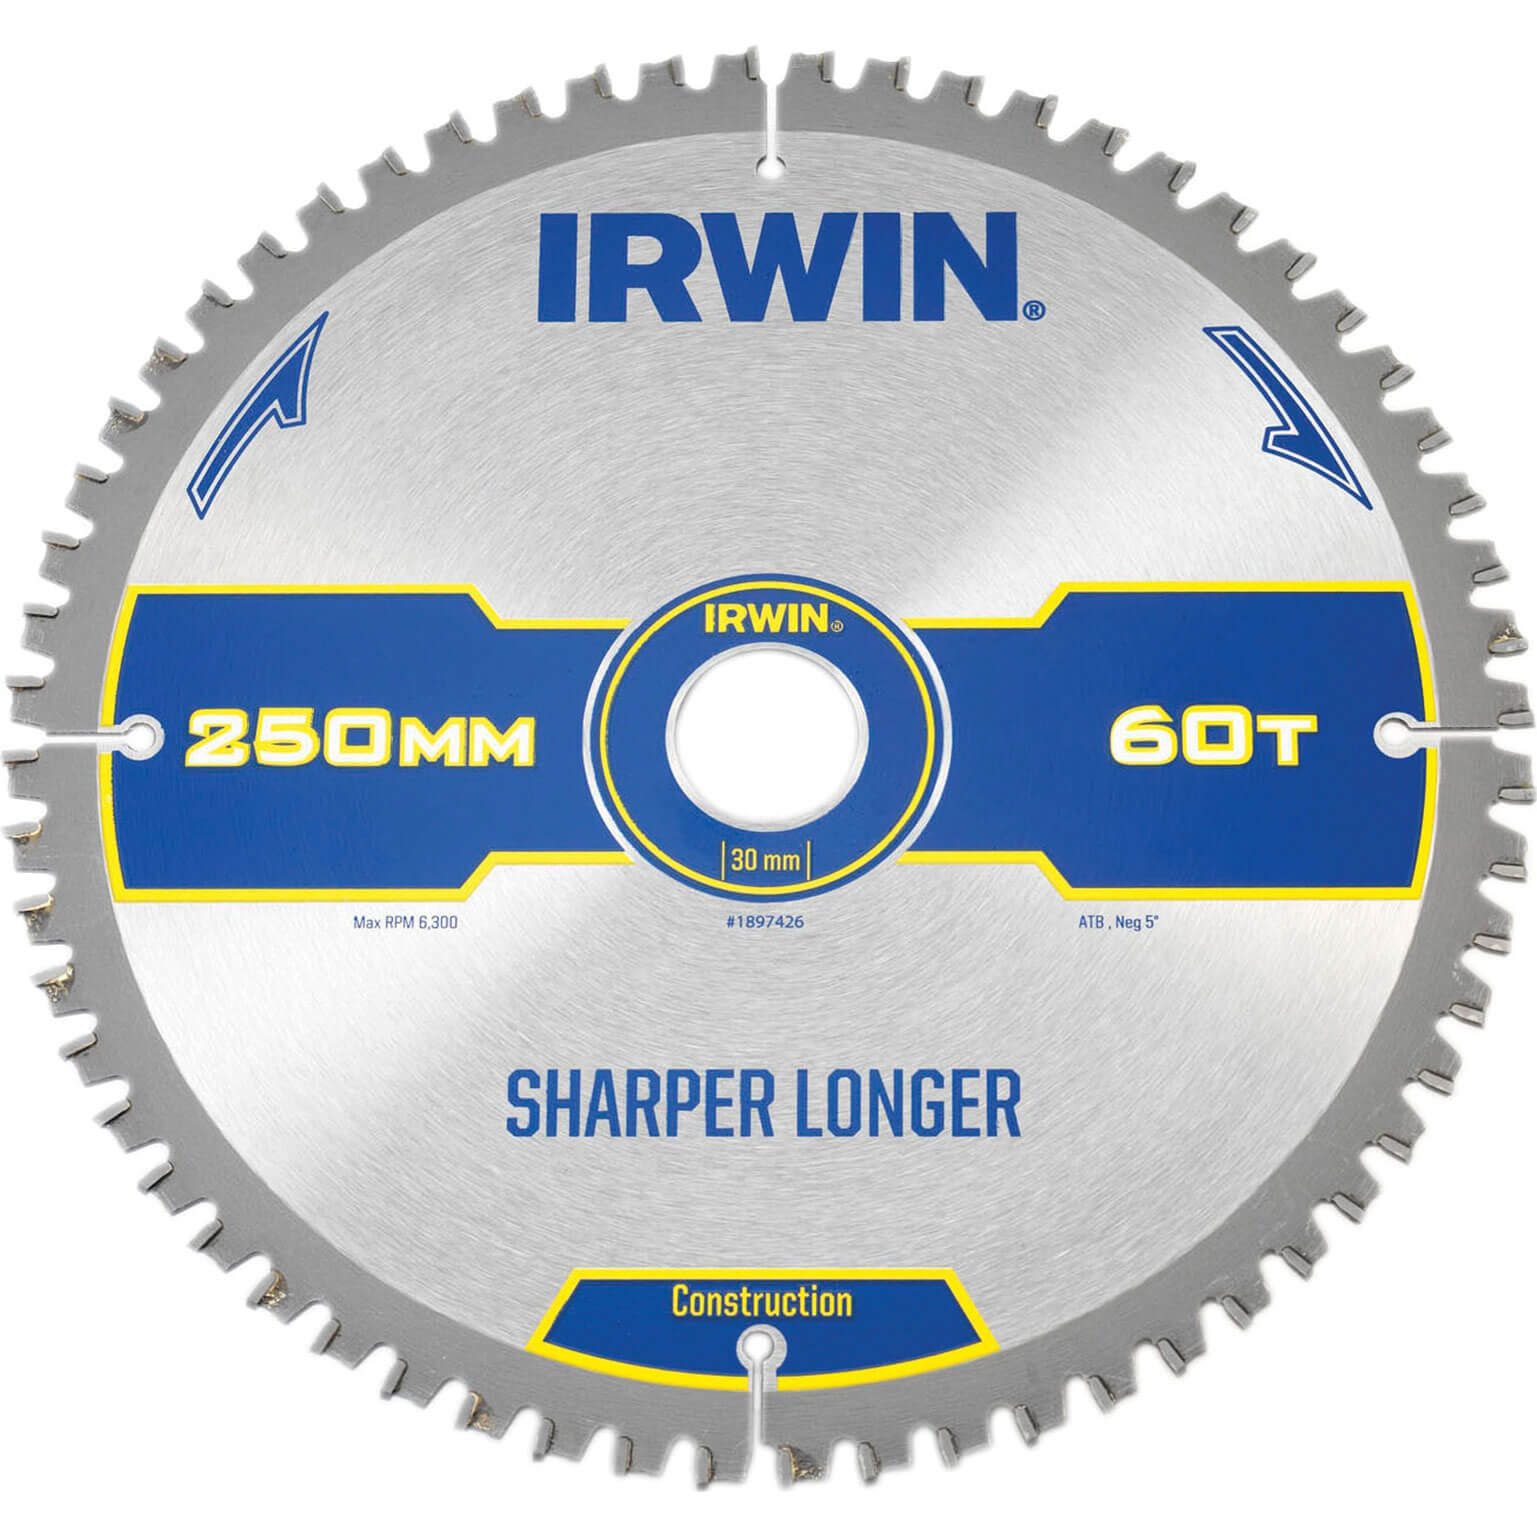 Image of Irwin ATB Ultra Construction Circular Saw Blade 250mm 60T 30mm